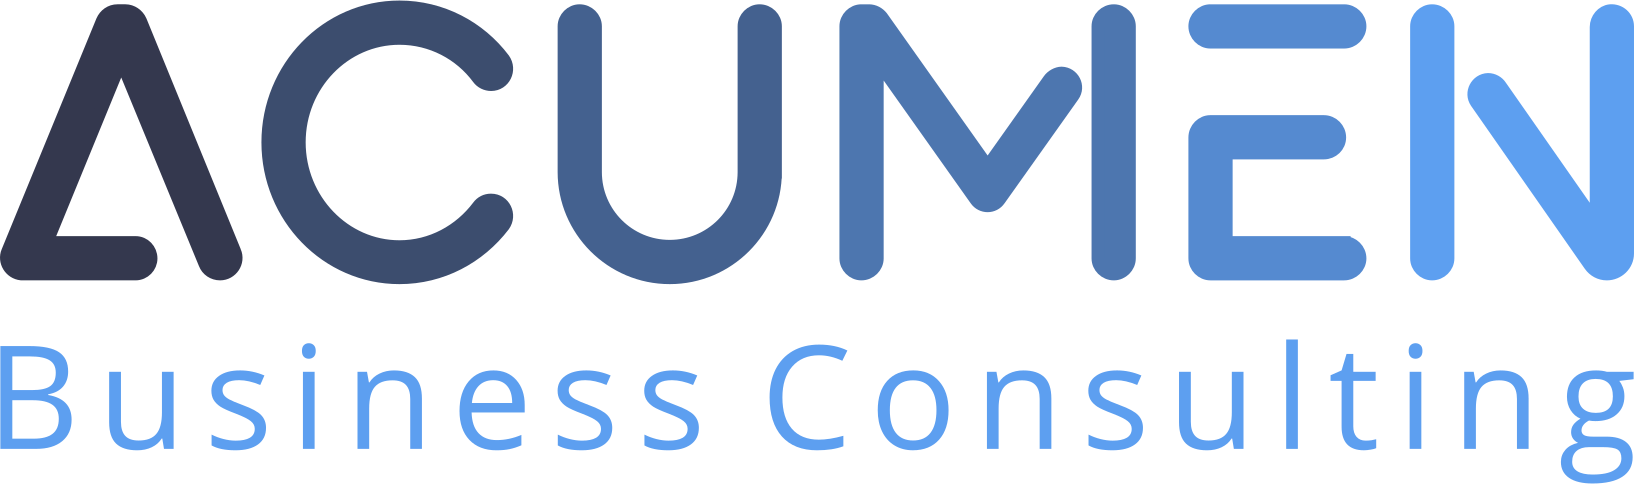 Logo for Acumen Business Consulting Inc.